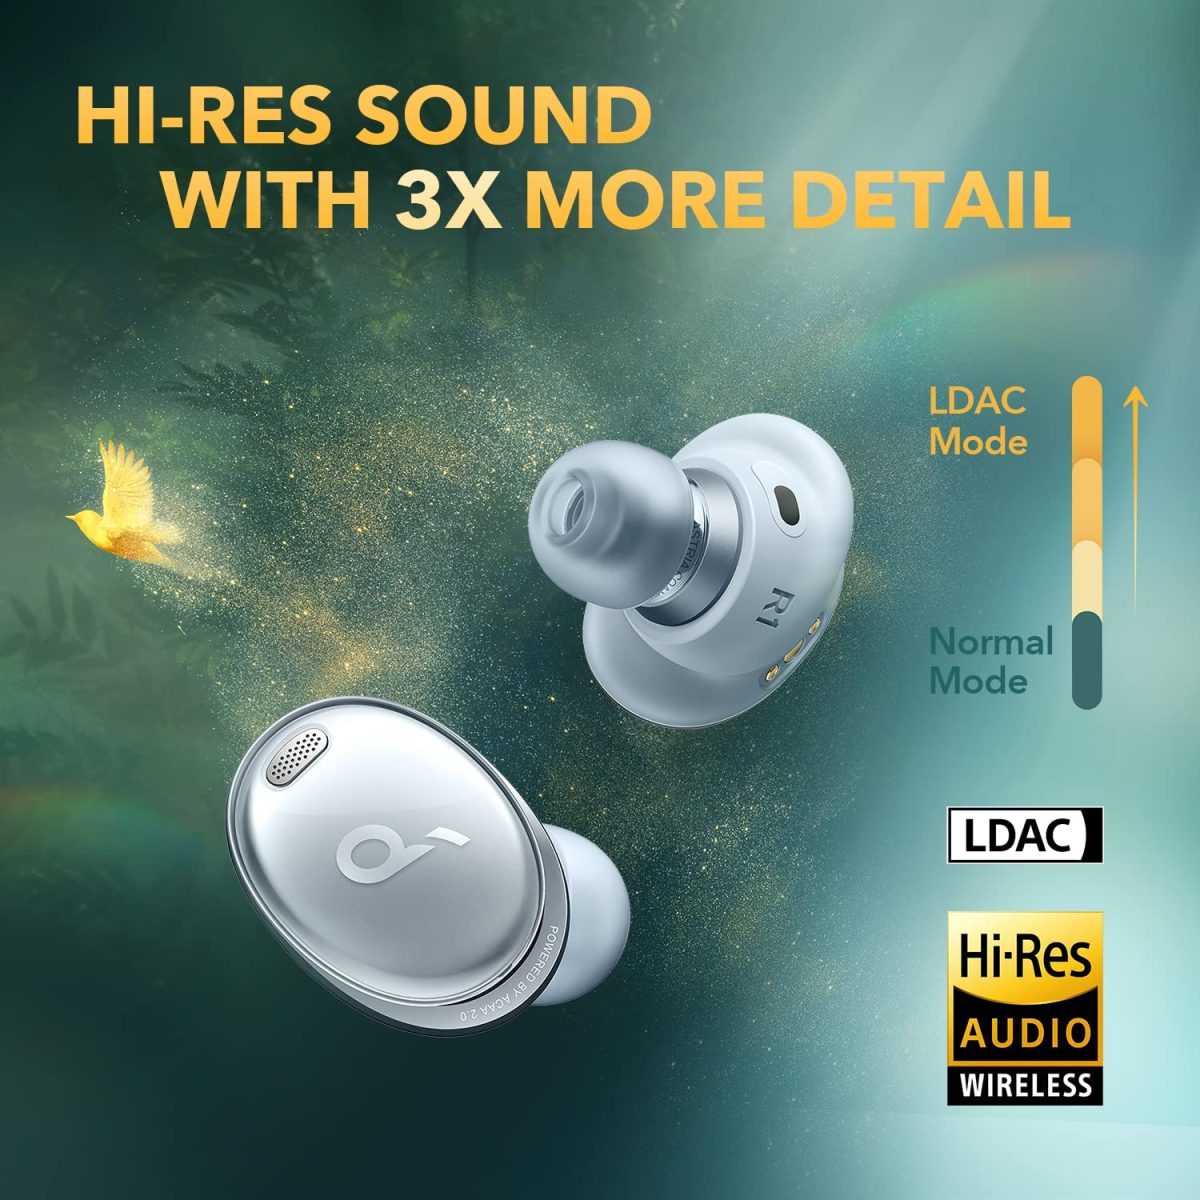 71Zemrgtrpl. Ac Sl1500 Soundcore &Lt;H1 Id=&Quot;Title&Quot; Class=&Quot;A-Size-Large A-Spacing-None&Quot;&Gt;Anker Soundcore Liberty Air 3 Pro True Wireless Earbuds - Fog Gray&Lt;/H1&Gt; Https://Www.youtube.com/Watch?V=Bguj4K07Ruy &Lt;Ul&Gt; &Lt;Li&Gt;&Lt;B&Gt;Acaa 2.0:  &Lt;/B&Gt;Our Exclusive Coaxial Dual Driver Technology Delivers High And Low Frequency Sound Directly To Your Ear Without Interference. Its Wide Soundstage Is Detailed And Spacious, Bass Has A Deep Punch, Mids Are Luscious, And Treble Sparkles.&Lt;/Li&Gt; &Lt;Li&Gt;&Lt;B&Gt;Personalized Noise Cancelling:  &Lt;/B&Gt;Standard Noise Cancelling Only Adjusts Noise Based On Data. Hearid Anc Analyzes Your Ears And Level Of In-Ear Pressure To Create A Tailored Profile That Optimizes Noise Reduction And Reduces External Sound To Suit Your Ears.&Lt;/Li&Gt; &Lt;Li&Gt;&Lt;B&Gt;Fusion Comfort Fit:  &Lt;/B&Gt;Liberty 3 Pro’s Earbuds Have A Triple-Point Ergonomic Shape And Built-In Ear Pressure Relief For All-Day Comfort. 4 Sizes Of Liquid Silicone Ear Tips And Flexible Ear Wings Ensure You Get A Strong Seal And Secure Grip.&Lt;/Li&Gt; &Lt;Li&Gt;&Lt;B&Gt;Up To 32 Hours Of Playtime:  &Lt;/B&Gt;Enjoy Up To 8 Hours Of Music From A Single Charge, Plus Get 3 Full Charges From The Compact Charging Case To Extend The Playtime Even Further. Recharge The Case Via Usb-C Cable Or Wireless Charger.&Lt;/Li&Gt; &Lt;/Ul&Gt; &Lt;H5&Gt;Warranty: Anker Product Warranty&Lt;/H5&Gt; &Lt;Pre&Gt;&Lt;B&Gt;We Also Provide International Wholesale And Retail Shipping To All Gcc Countries: Saudi Arabia, Qatar, Oman, Kuwait, Bahrain.&Lt;/B&Gt;&Lt;/Pre&Gt; Earbuds Anker Soundcore Liberty Air 3 Pro True Wireless Earbuds - Fog Gray